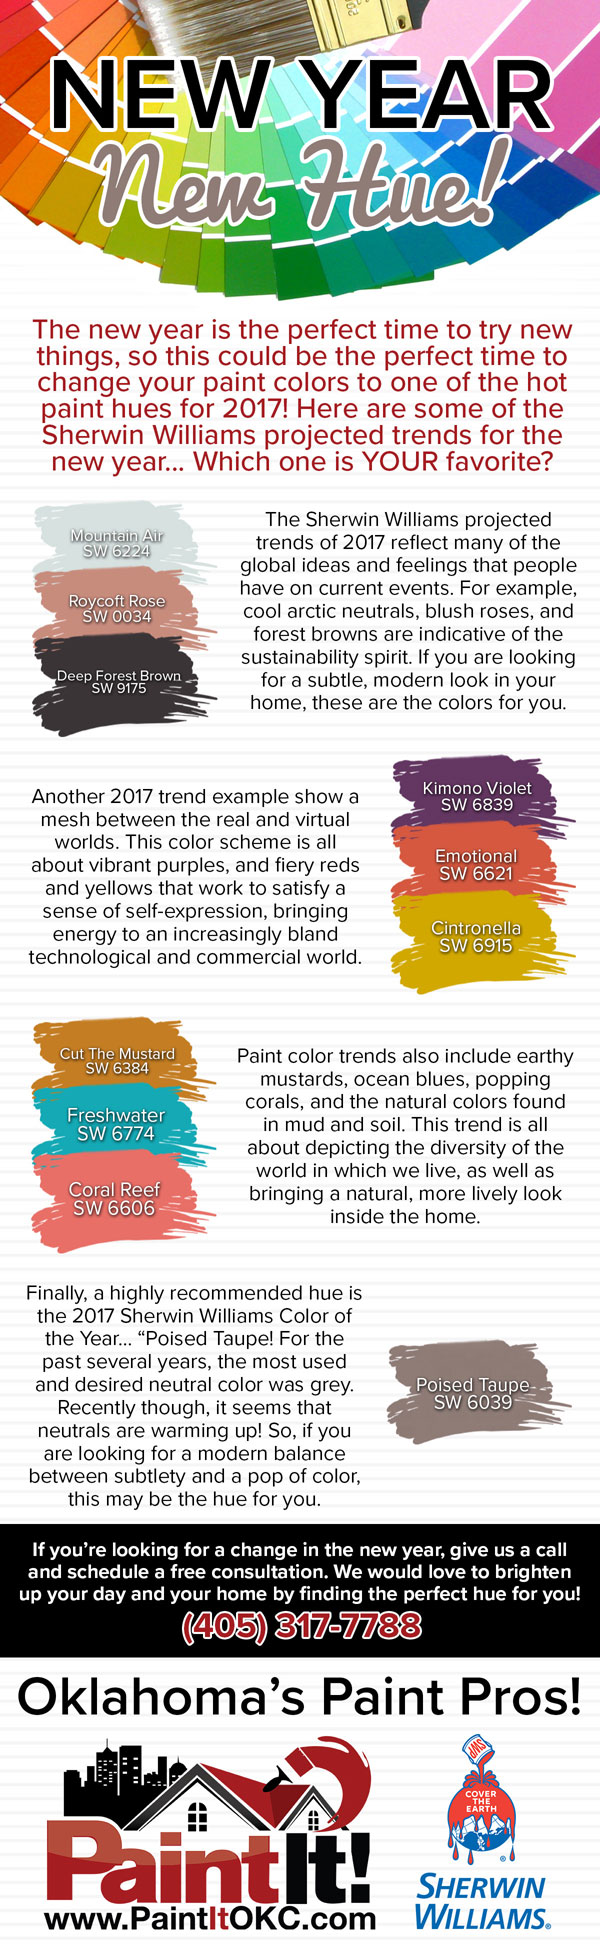 Paint It OKC Infographic on 2017 Interior Painting Colors in OKC.